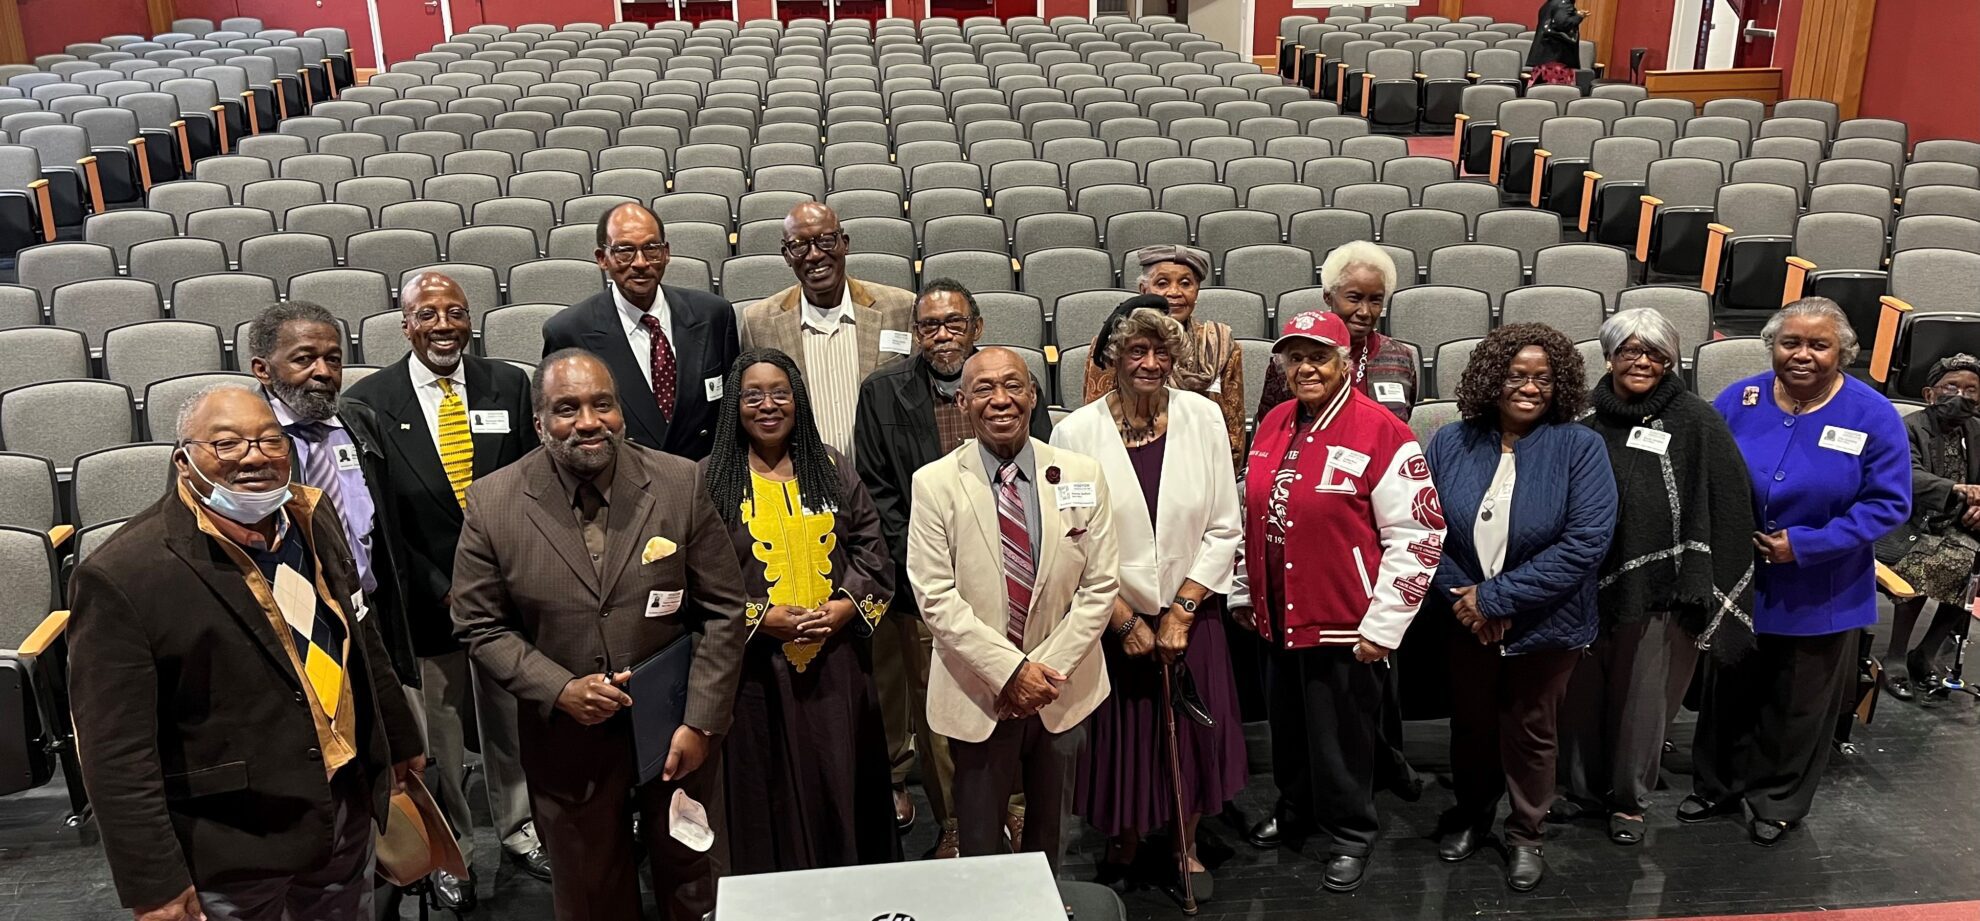 group of elderly adults stand for a photo in front of auditorium seats 